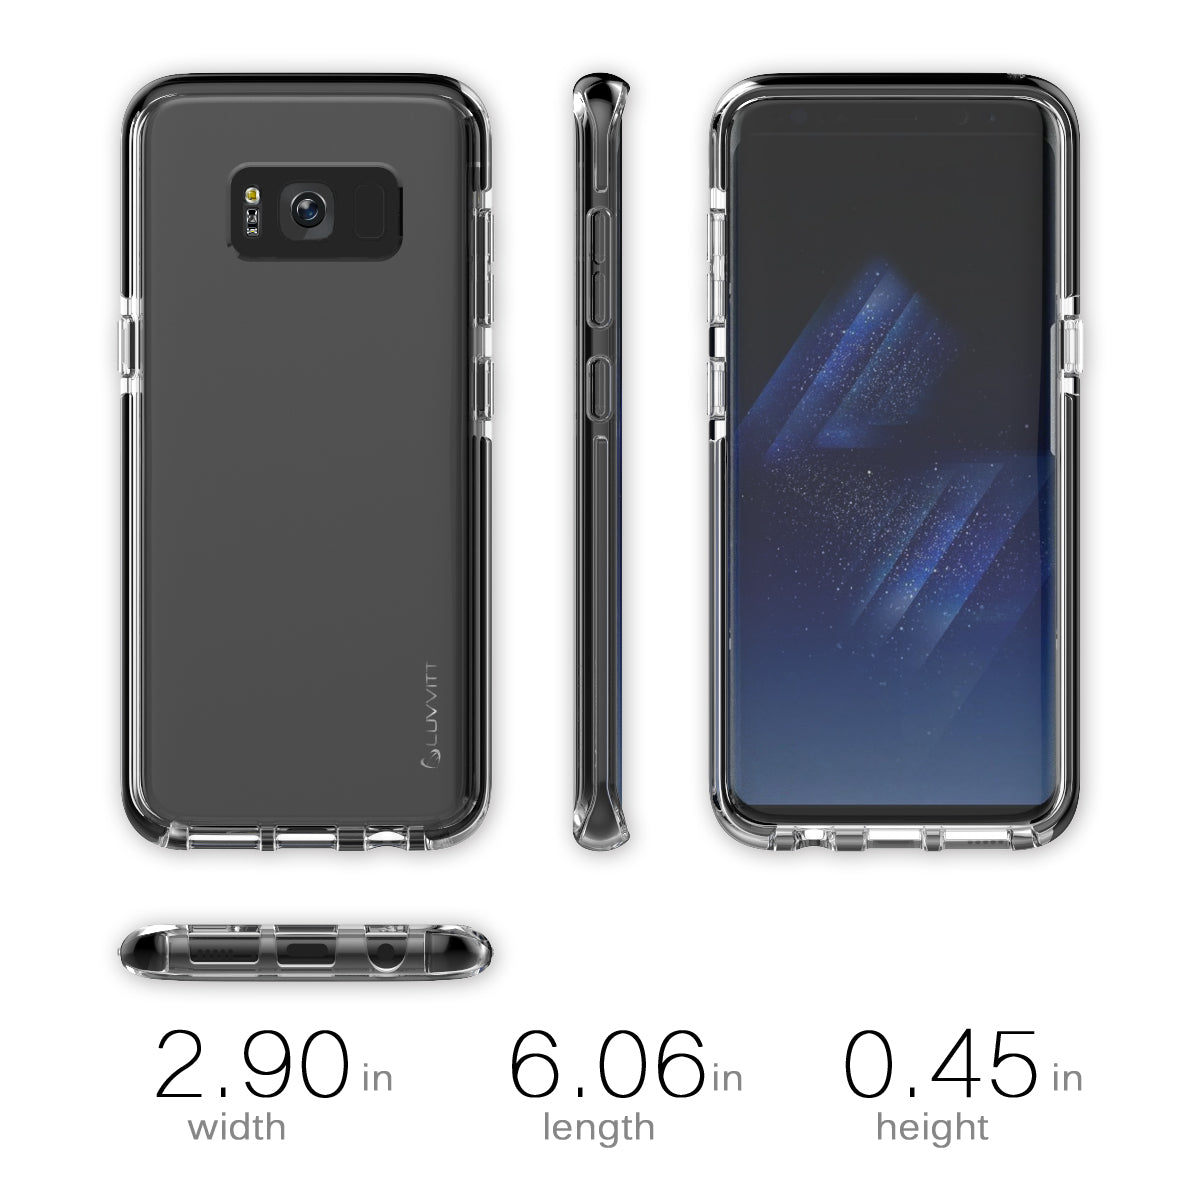 LUVVITT PROOFTECH Case for Galaxy S8 - Clear / Black